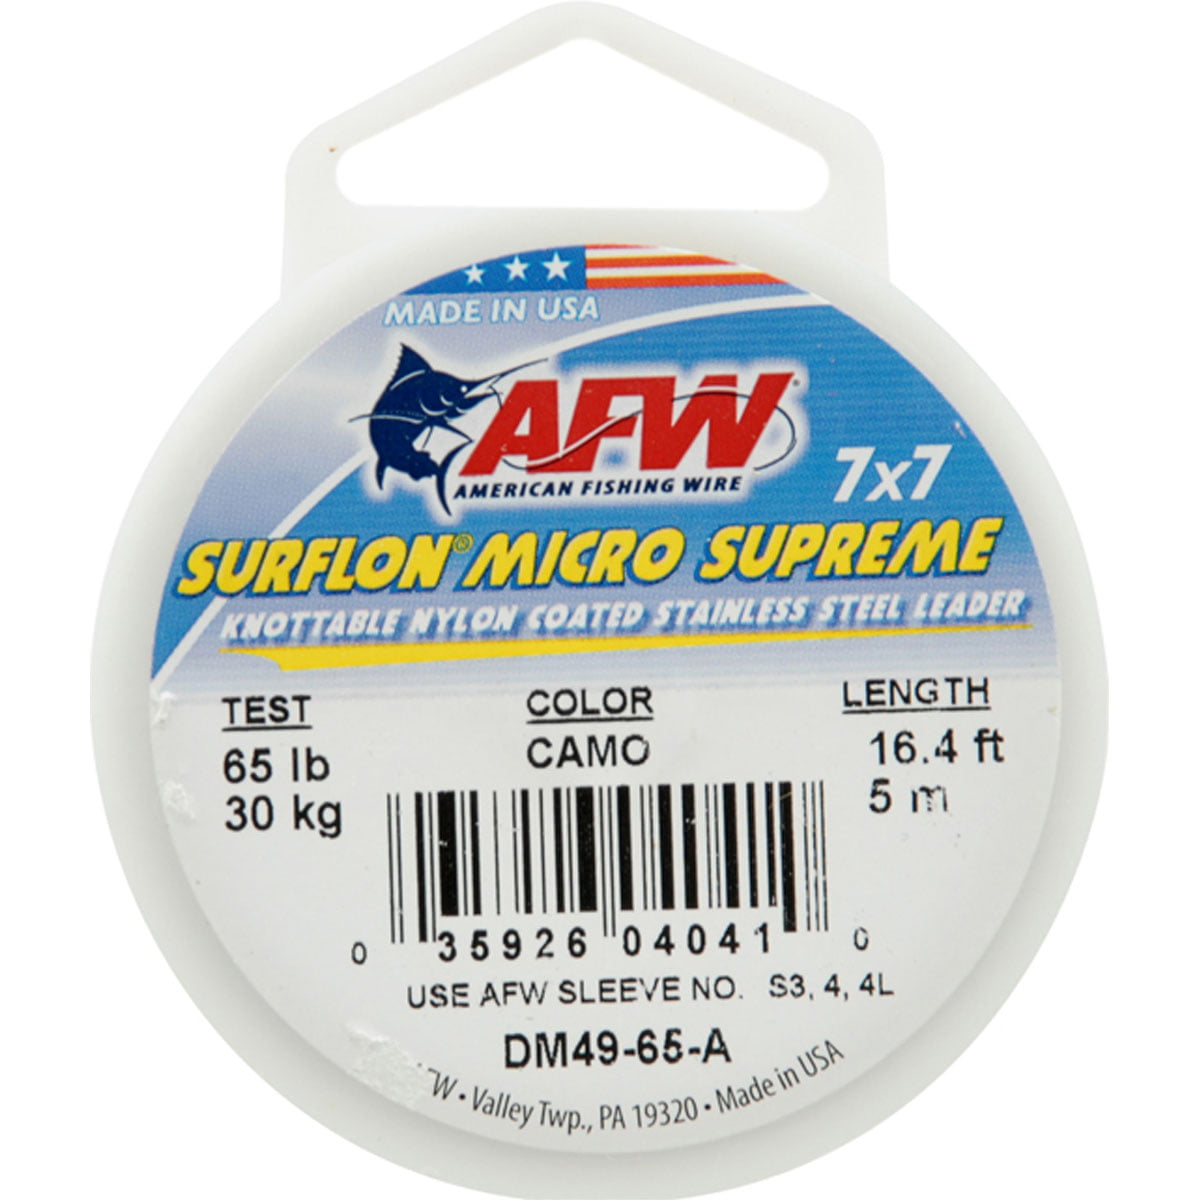 AFW AMERICAN FISHING WIRE 49-Stand 7x7 Stainless Steel Leader Cable 175lb Brown 